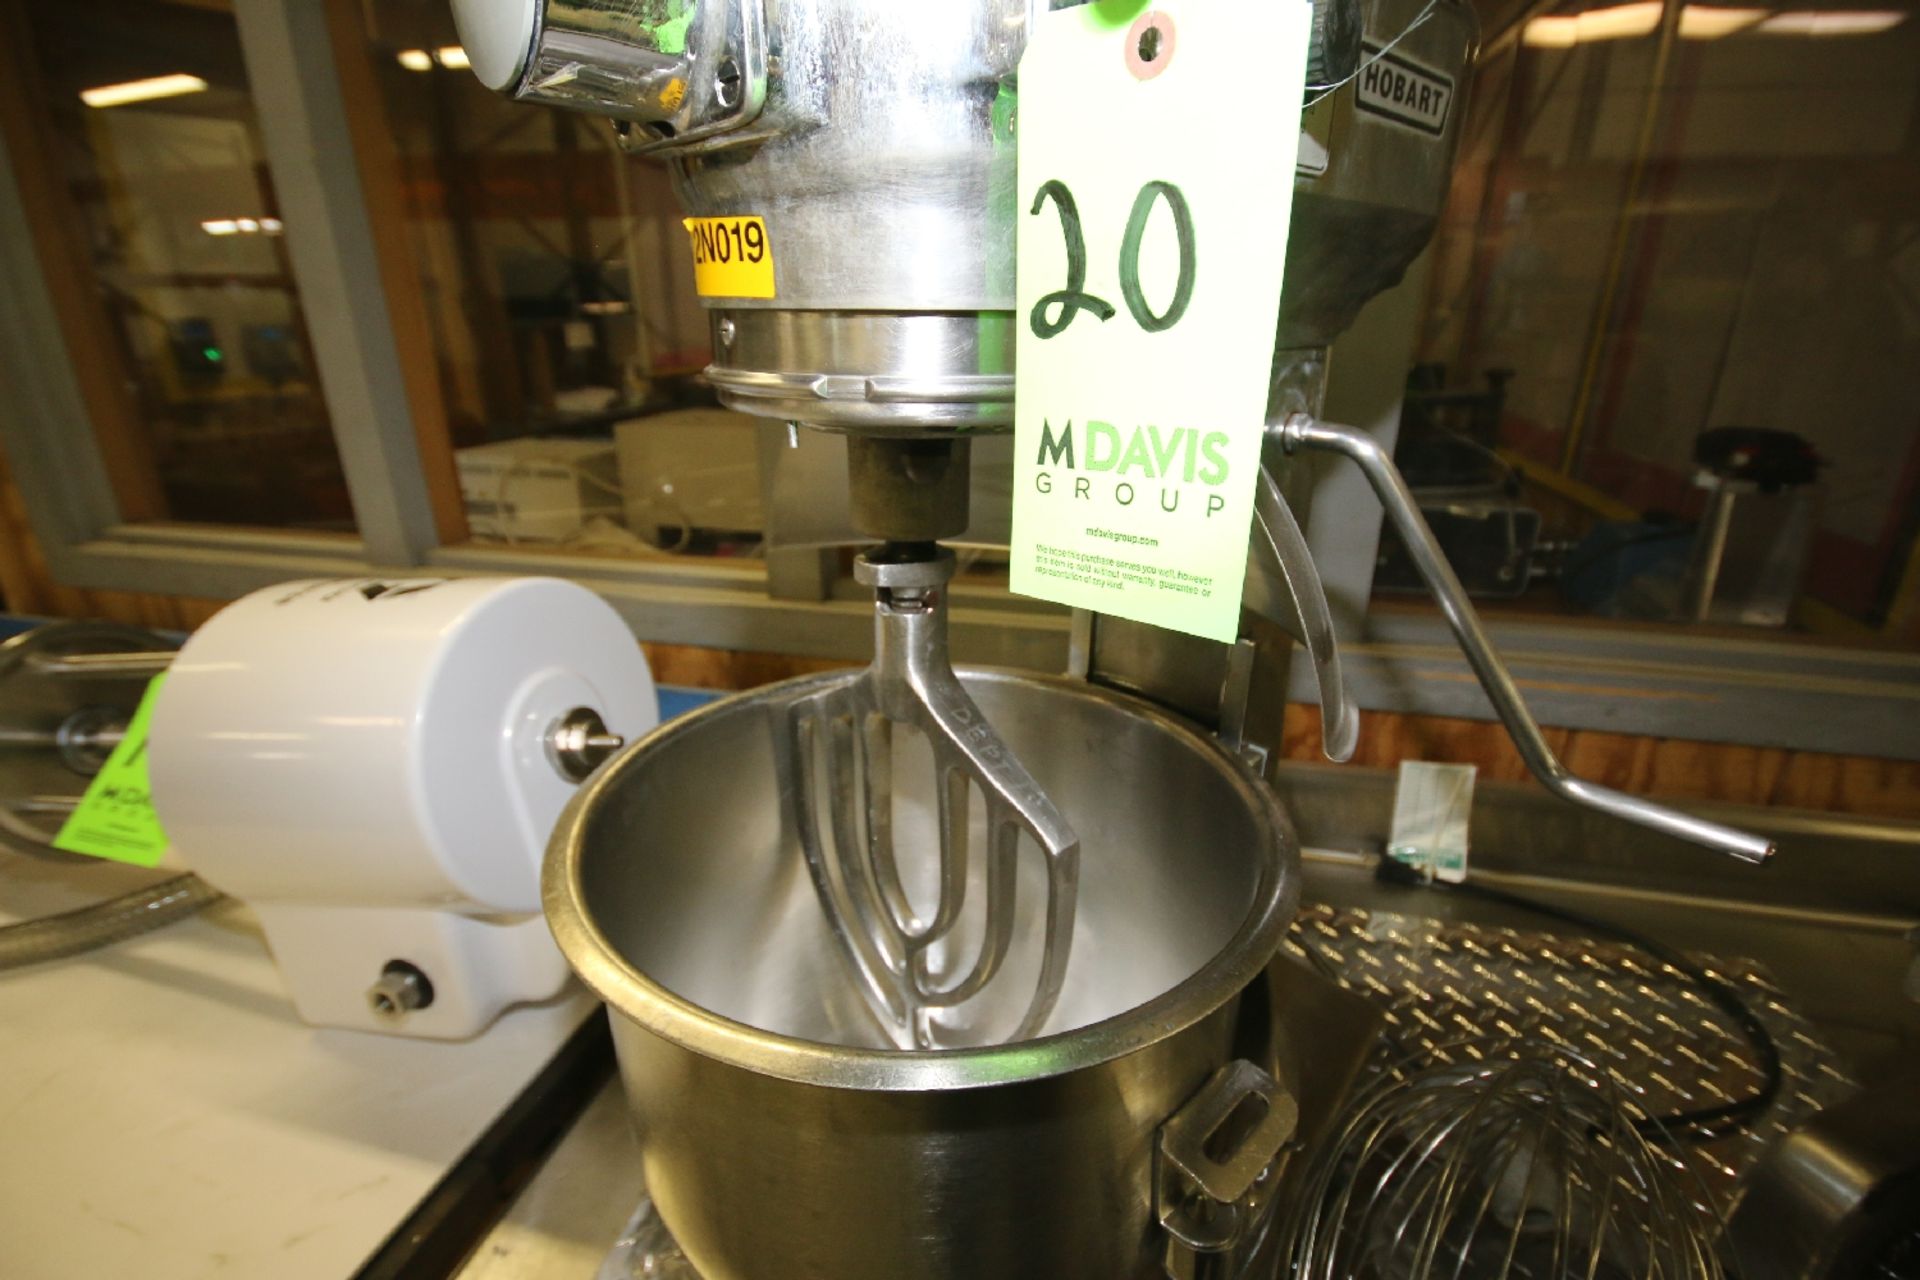 Hobart S/S Table Top Mixer, Model A-200DT, S/N 1-1195-005 with 12" W x 11" Deep S/S Mixing Bowl, - Image 2 of 5